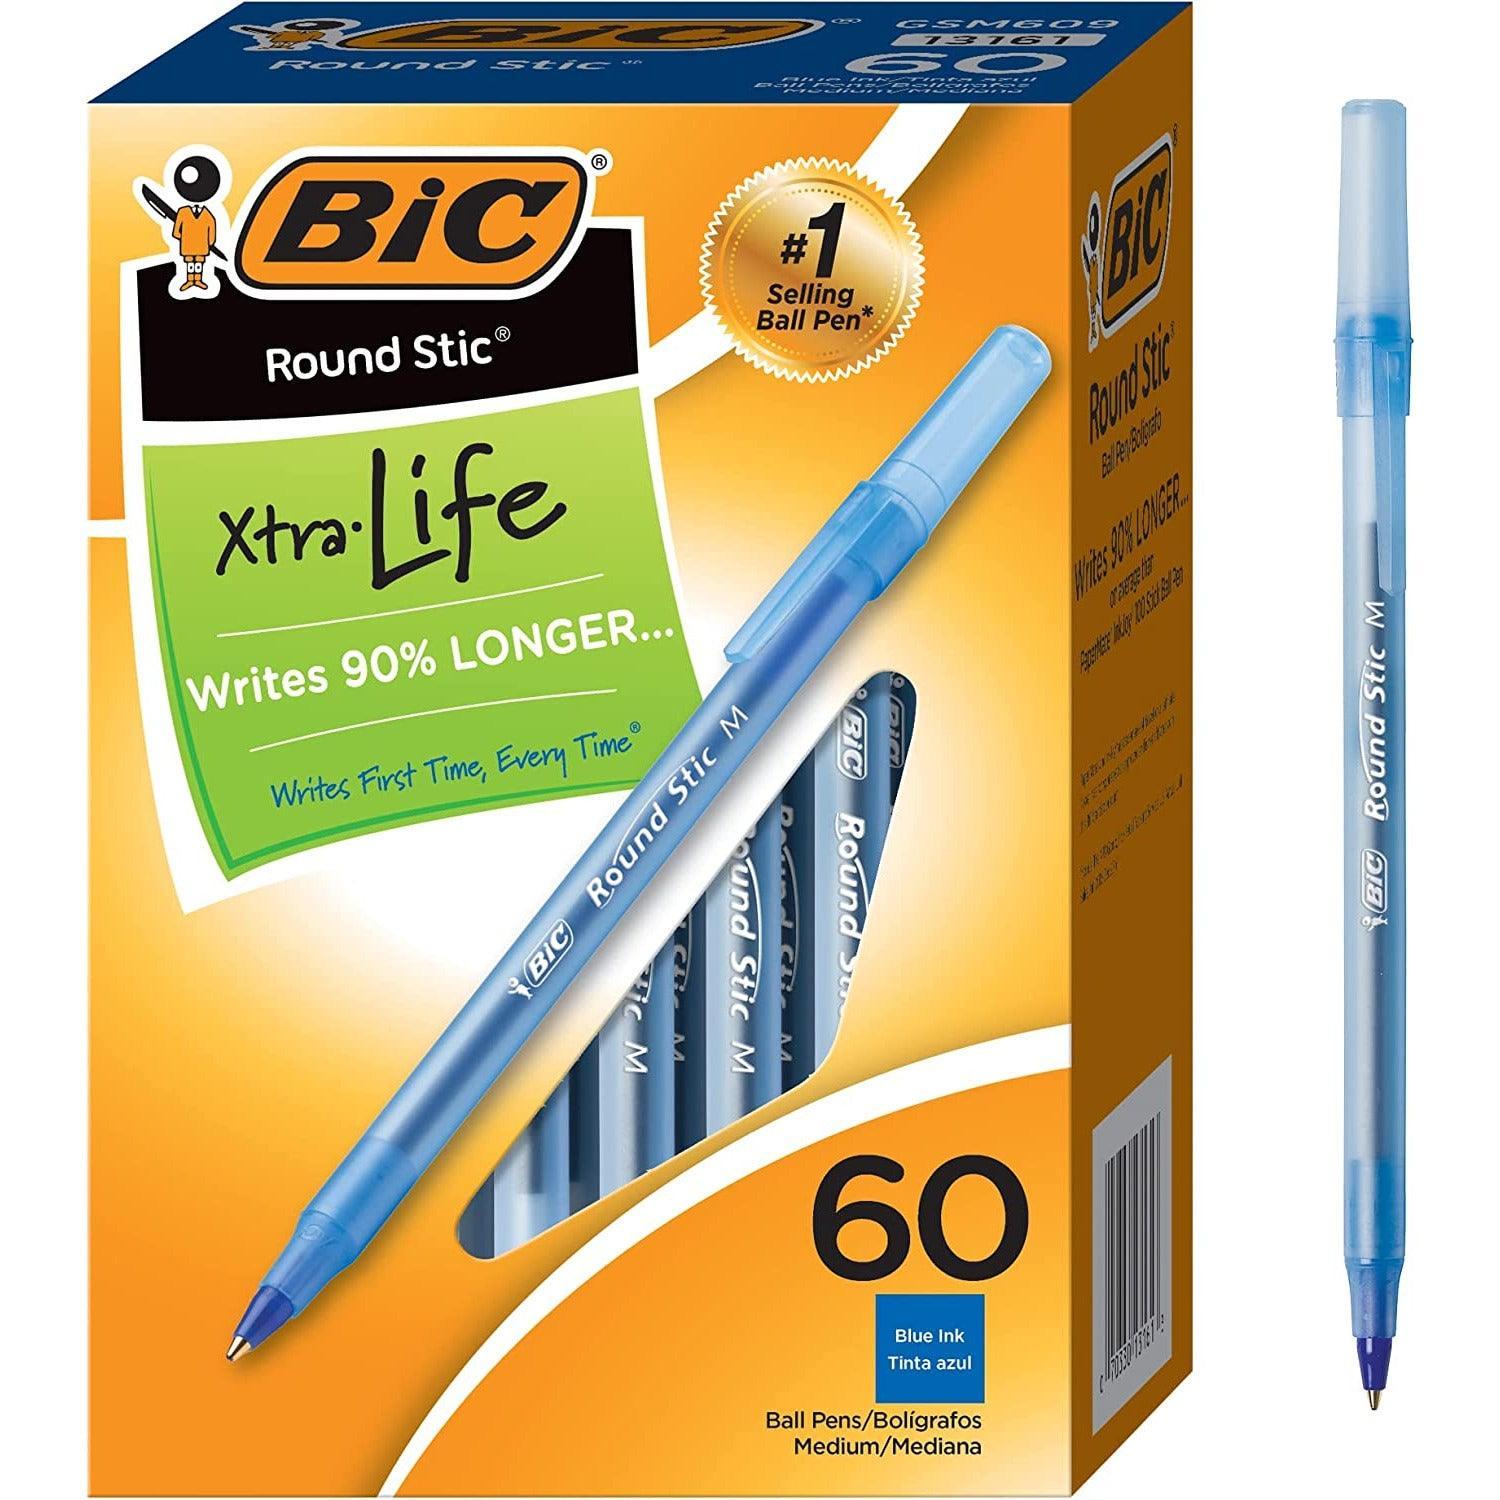 BIC Round Stic Xtra Life Ballpoint Pens, Medium Point (1.0mm), Blue, 60-Count - BumbleToys - 5-7 Years, Drawing & Painting, Pencil, School Supplies, Stationery & Stickers